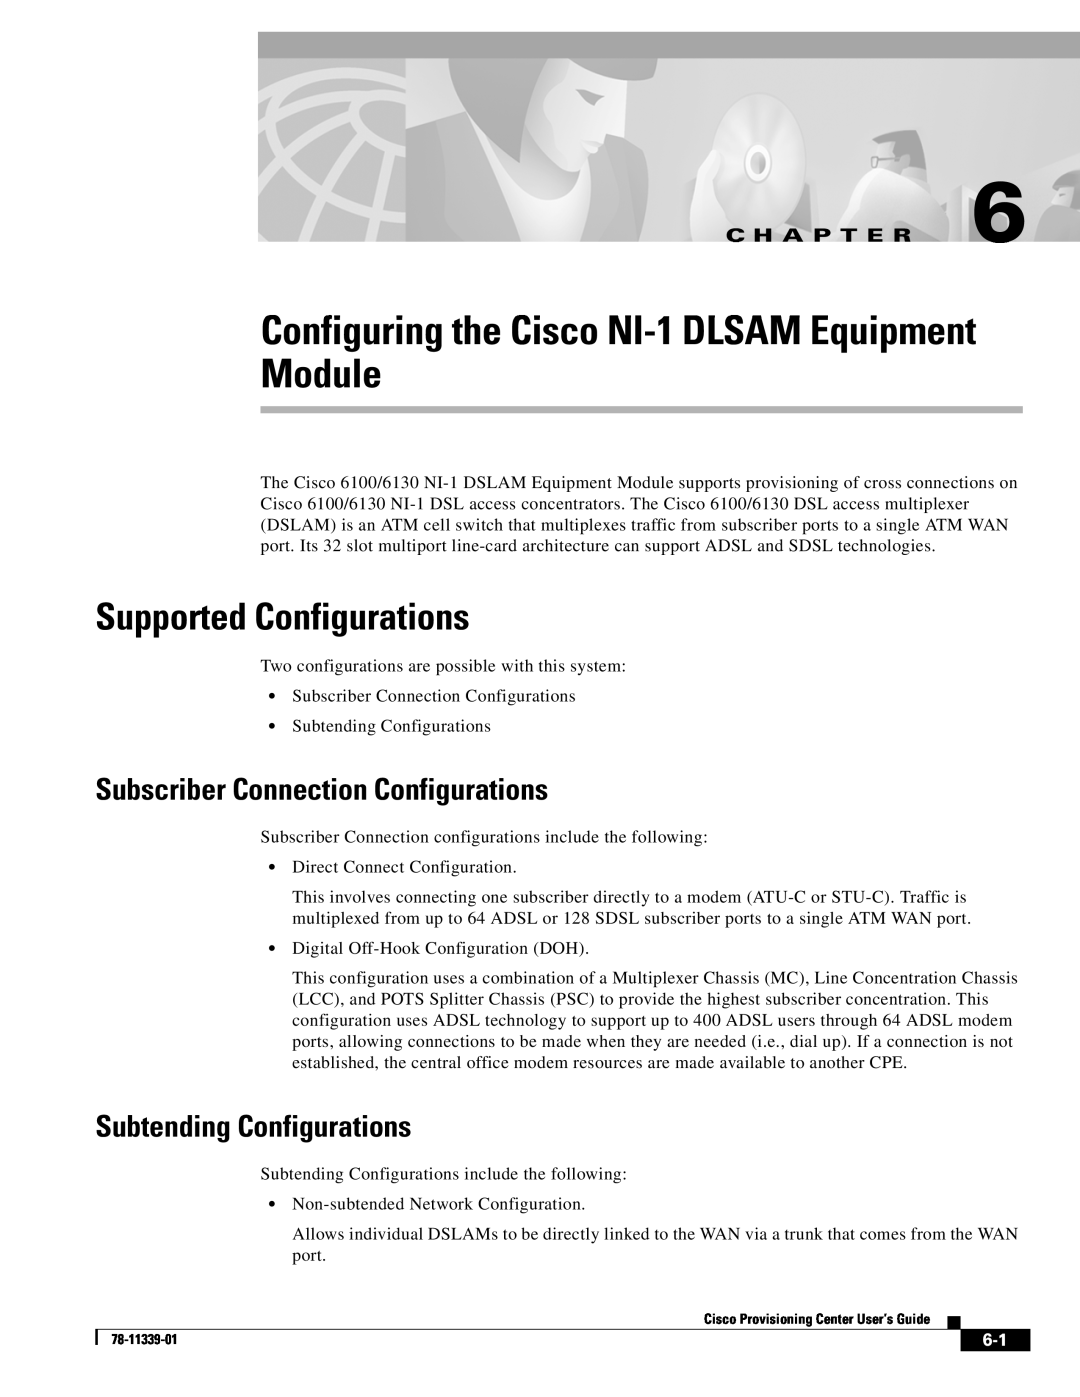 Cisco Systems NI-1 manual Supported Configurations, Subscriber Connection Configurations, Subtending Configurations 